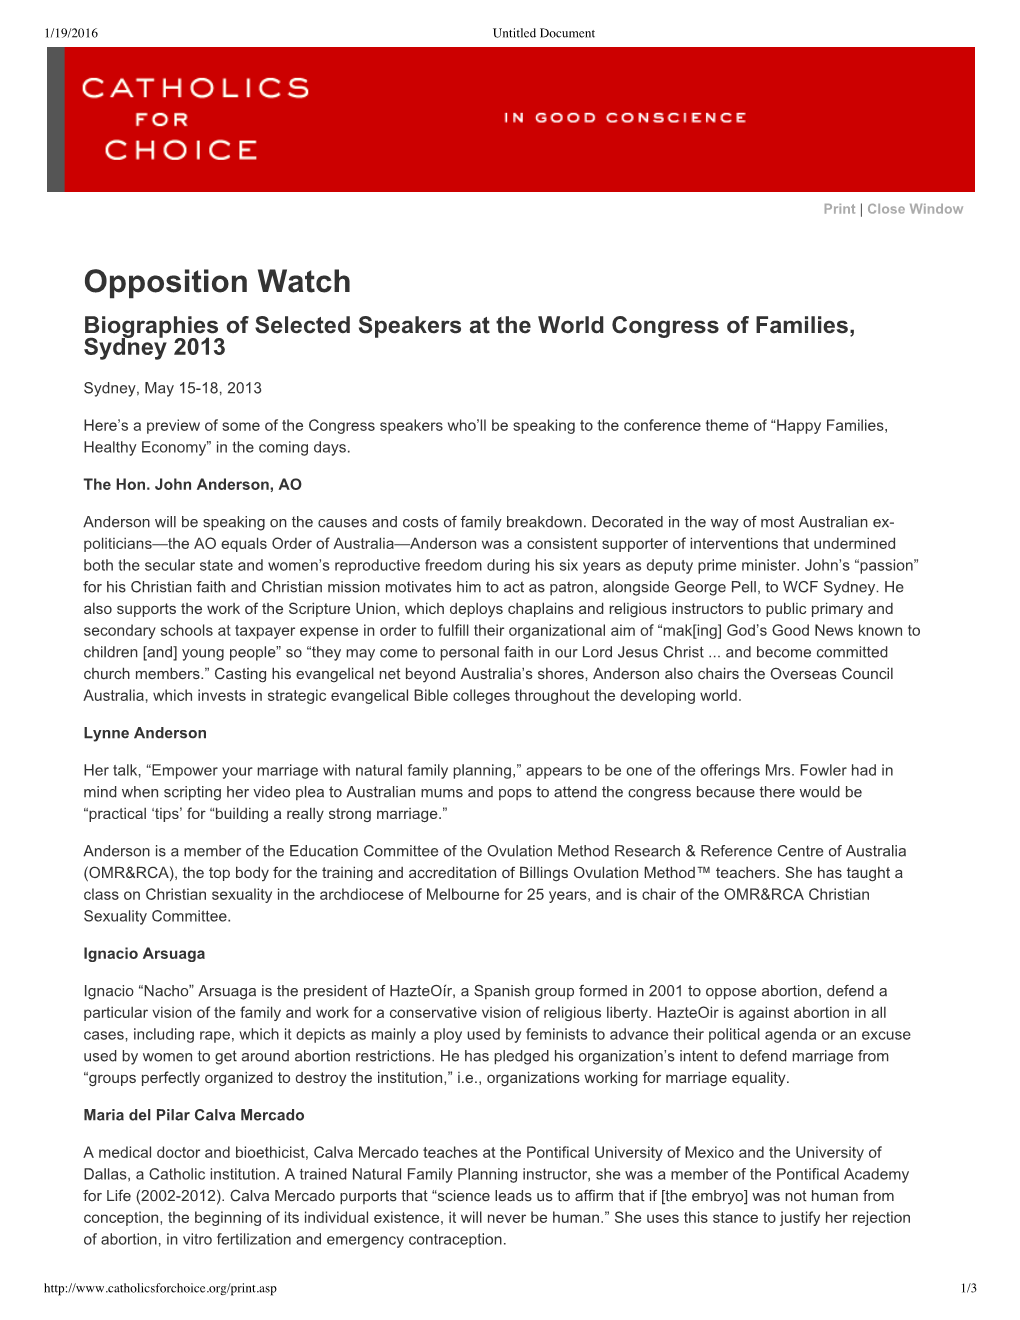 Opposition Watch Biographies of Selected Speakers at the World Congress of Families, Sydney 2013